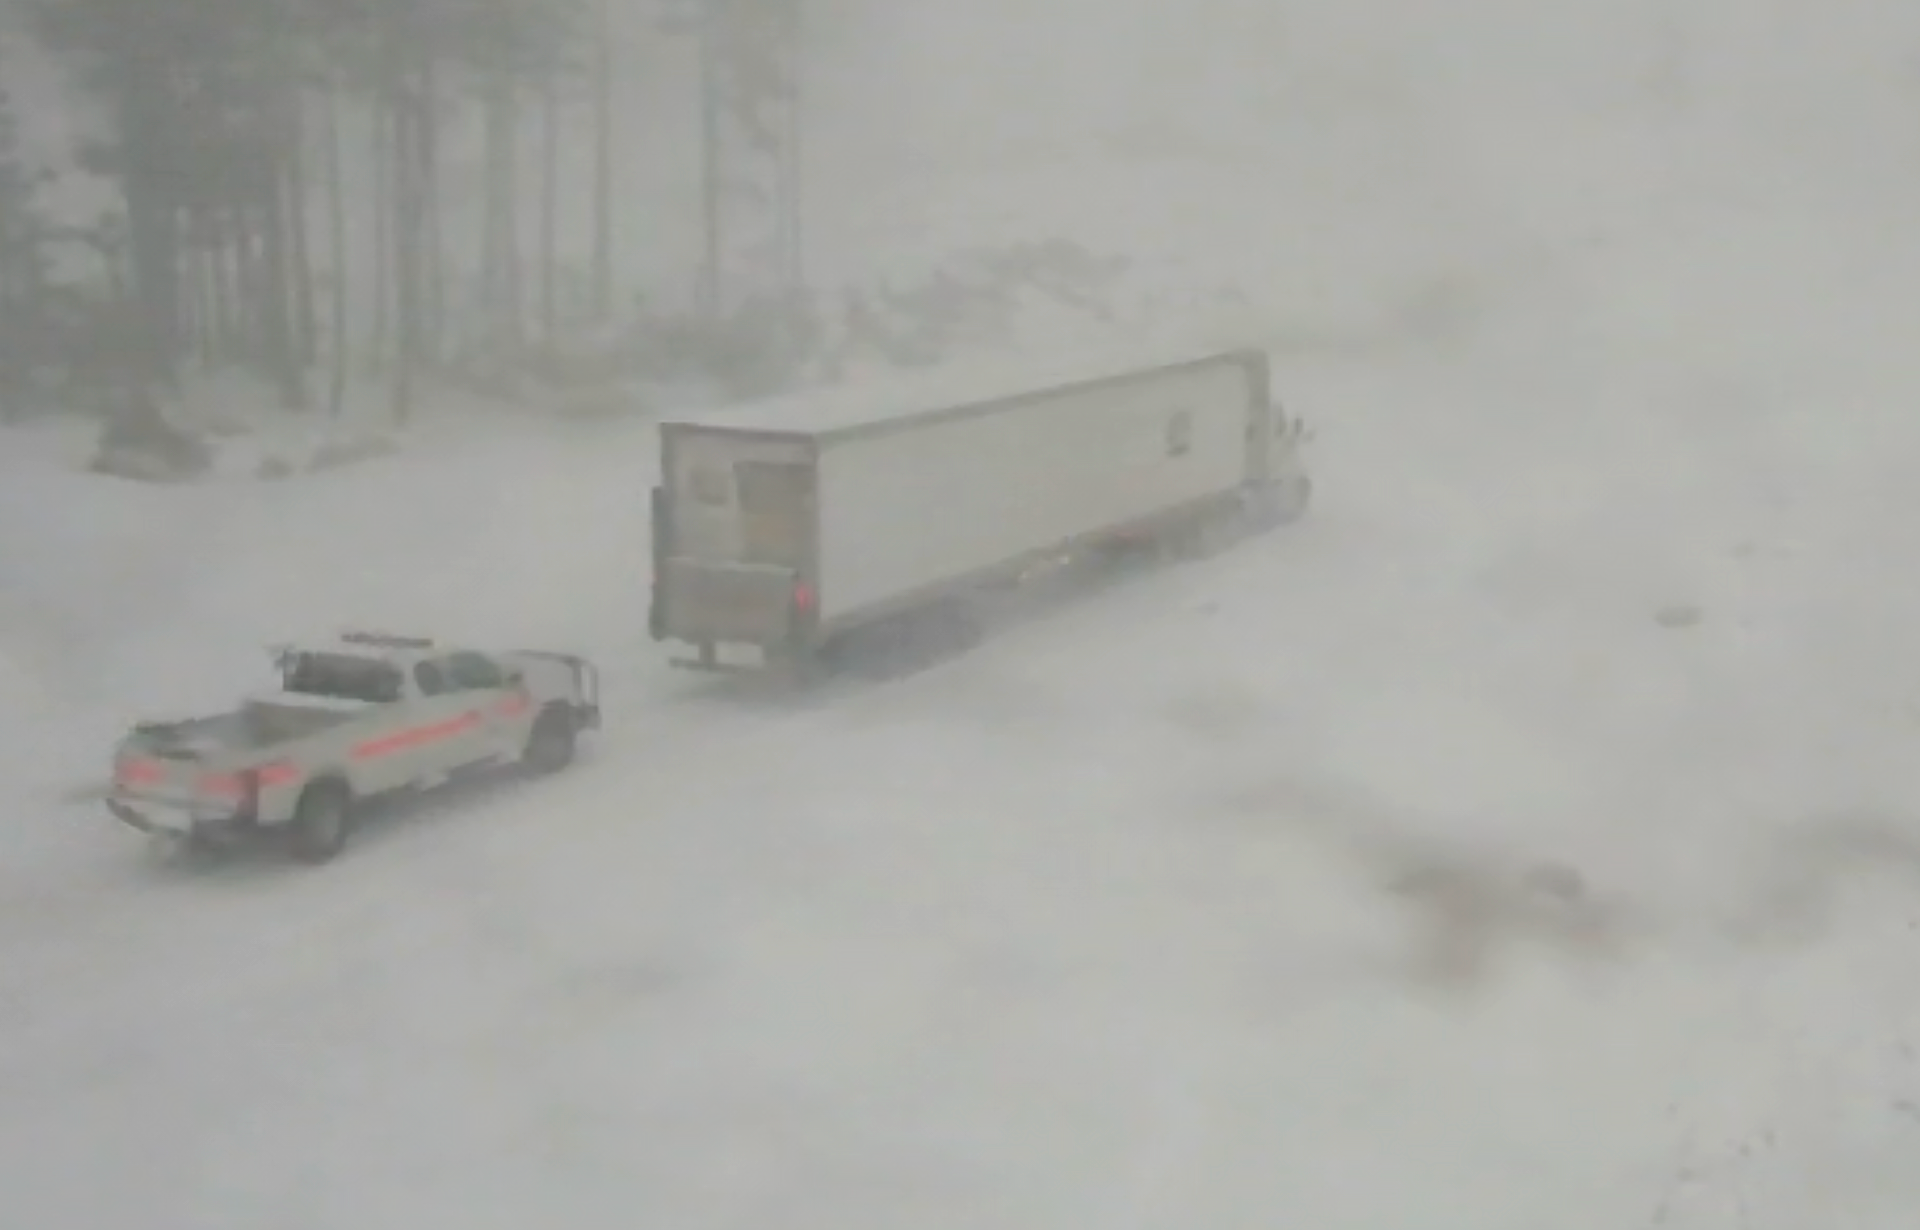 A screenshot of trucks driving through the snowy conditions on the road.